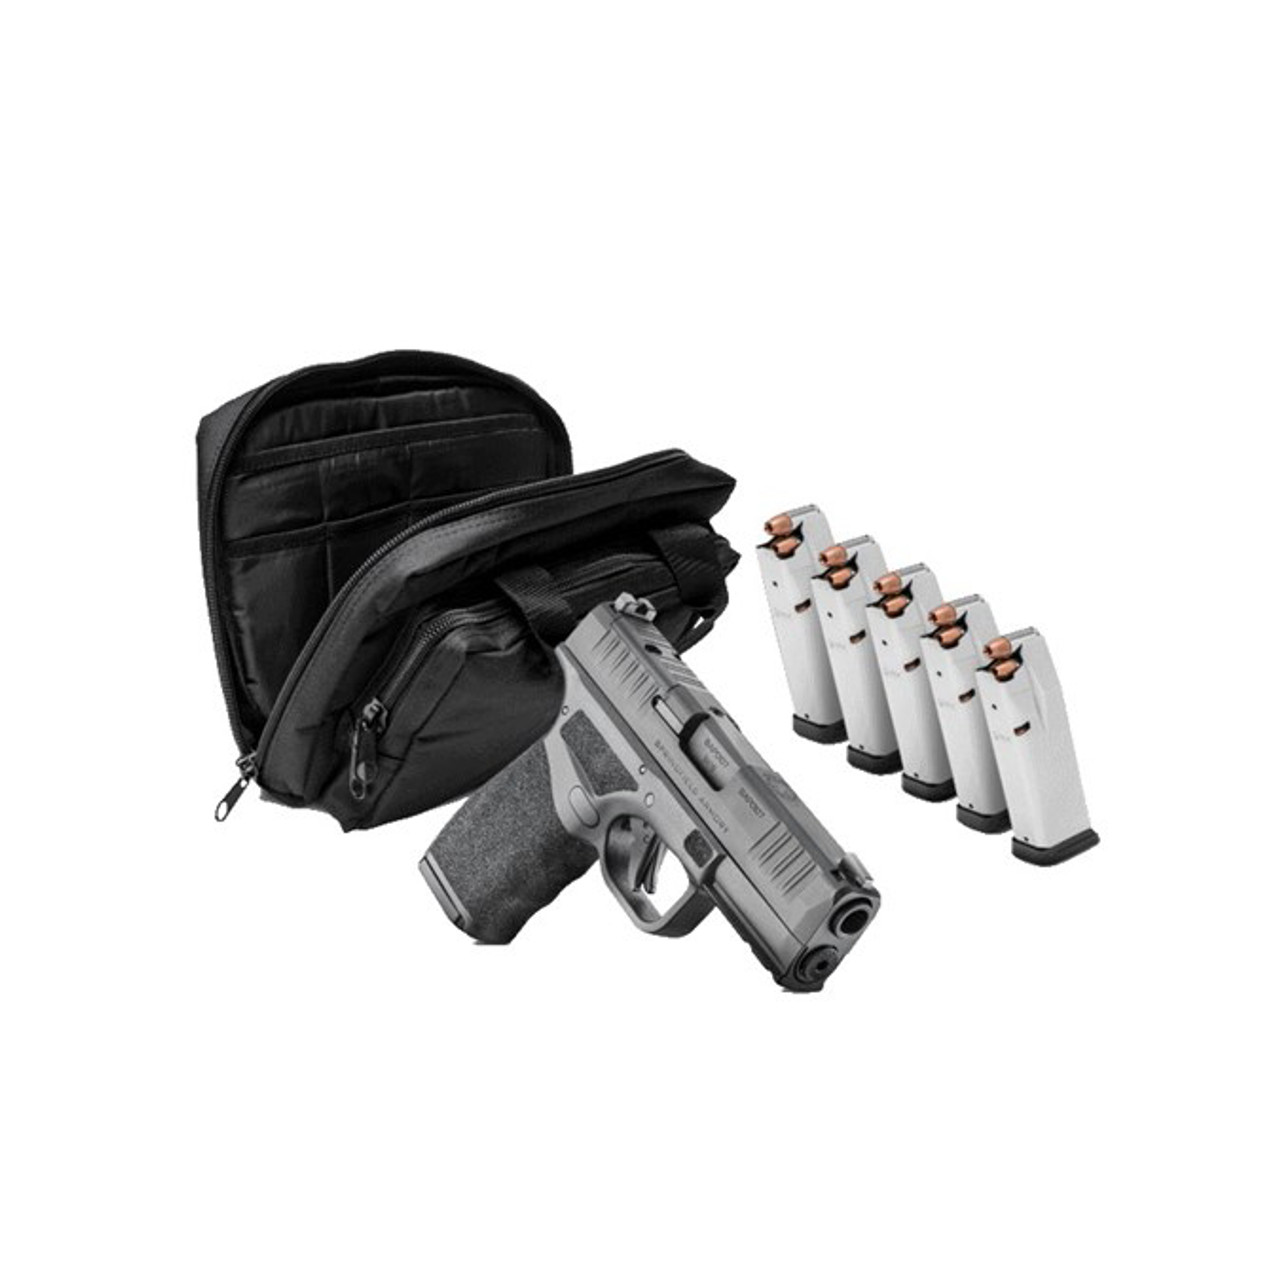 Springfield Armory Hellcat Pro OSP Gear Up Pack. 9mm 3.7" Barrel 17-Rounds 5 Mags w/ Bag